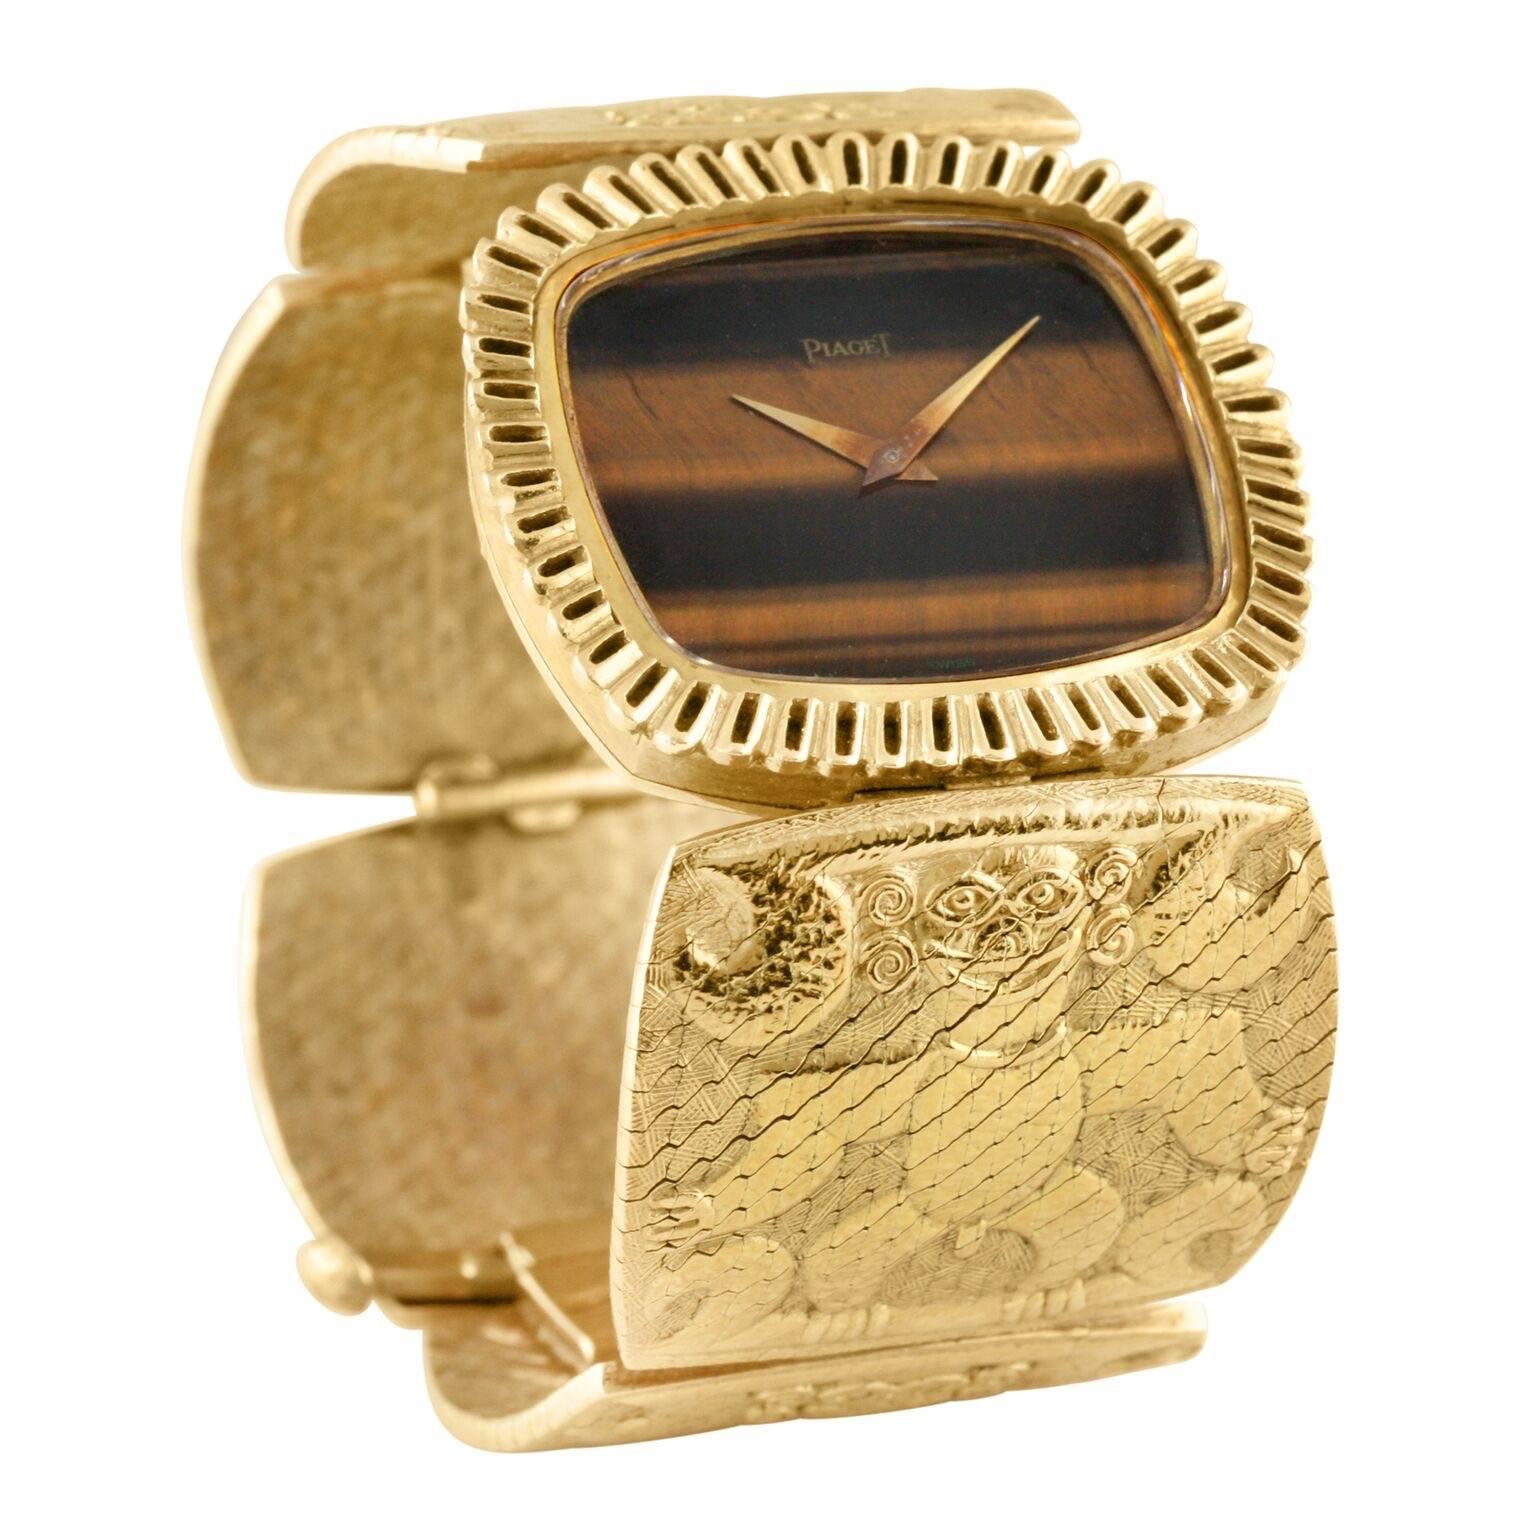 Manufactured in the early 1970's, this highly unusual and rare Piaget bracelet watch is truly one-of-a-kind. Bracelet is sculptural with relief images of 'Inca' figures in 18k solid yellow gold. Unique decorated bezel with a fitted Tiger's Eye stone